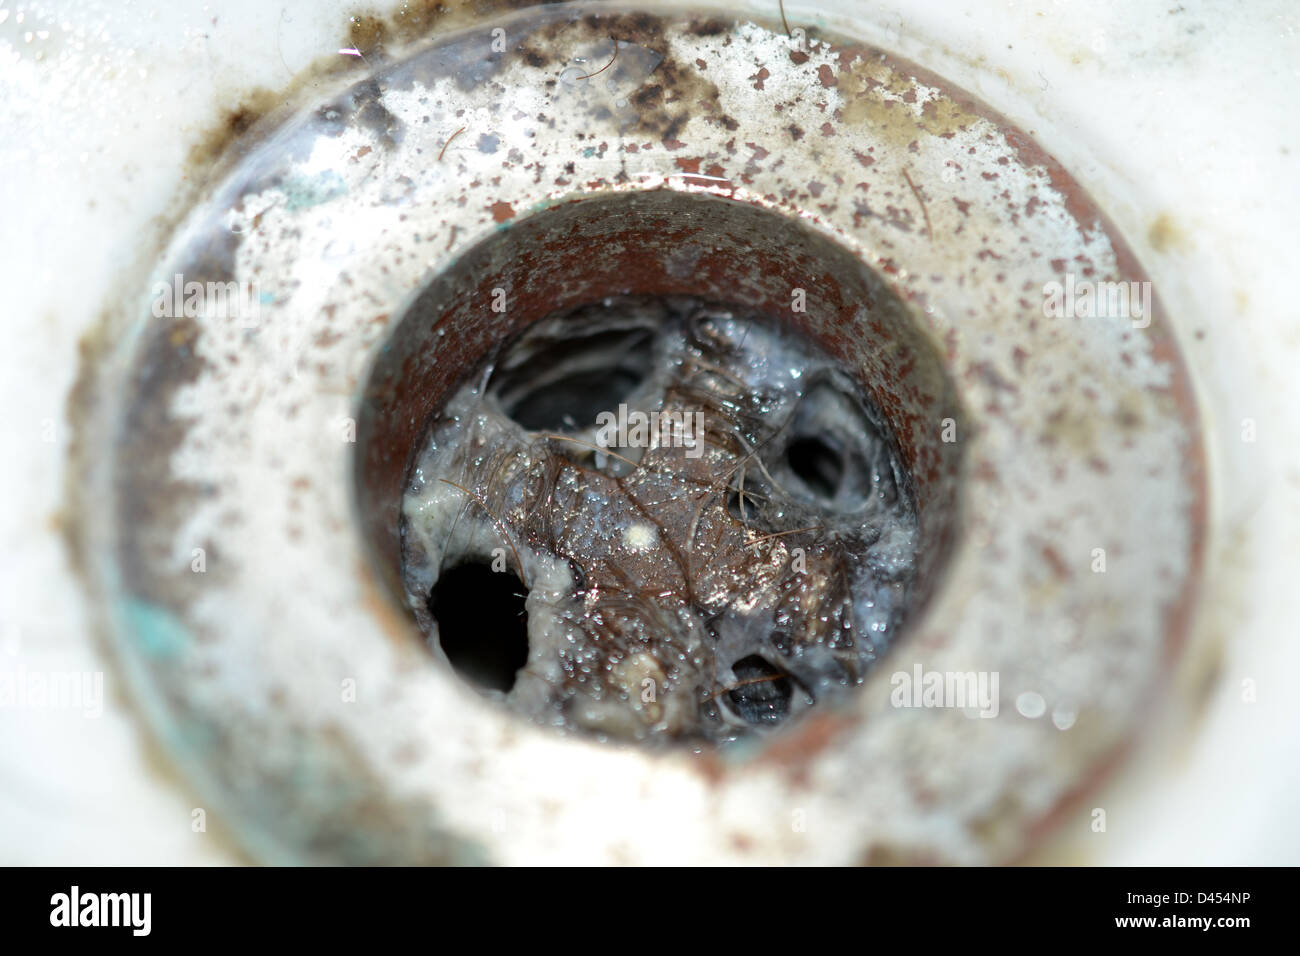 Close Up Of Clogged Bathroom Sink Drain Full Of Hair And Gunk Stock Photo Alamy